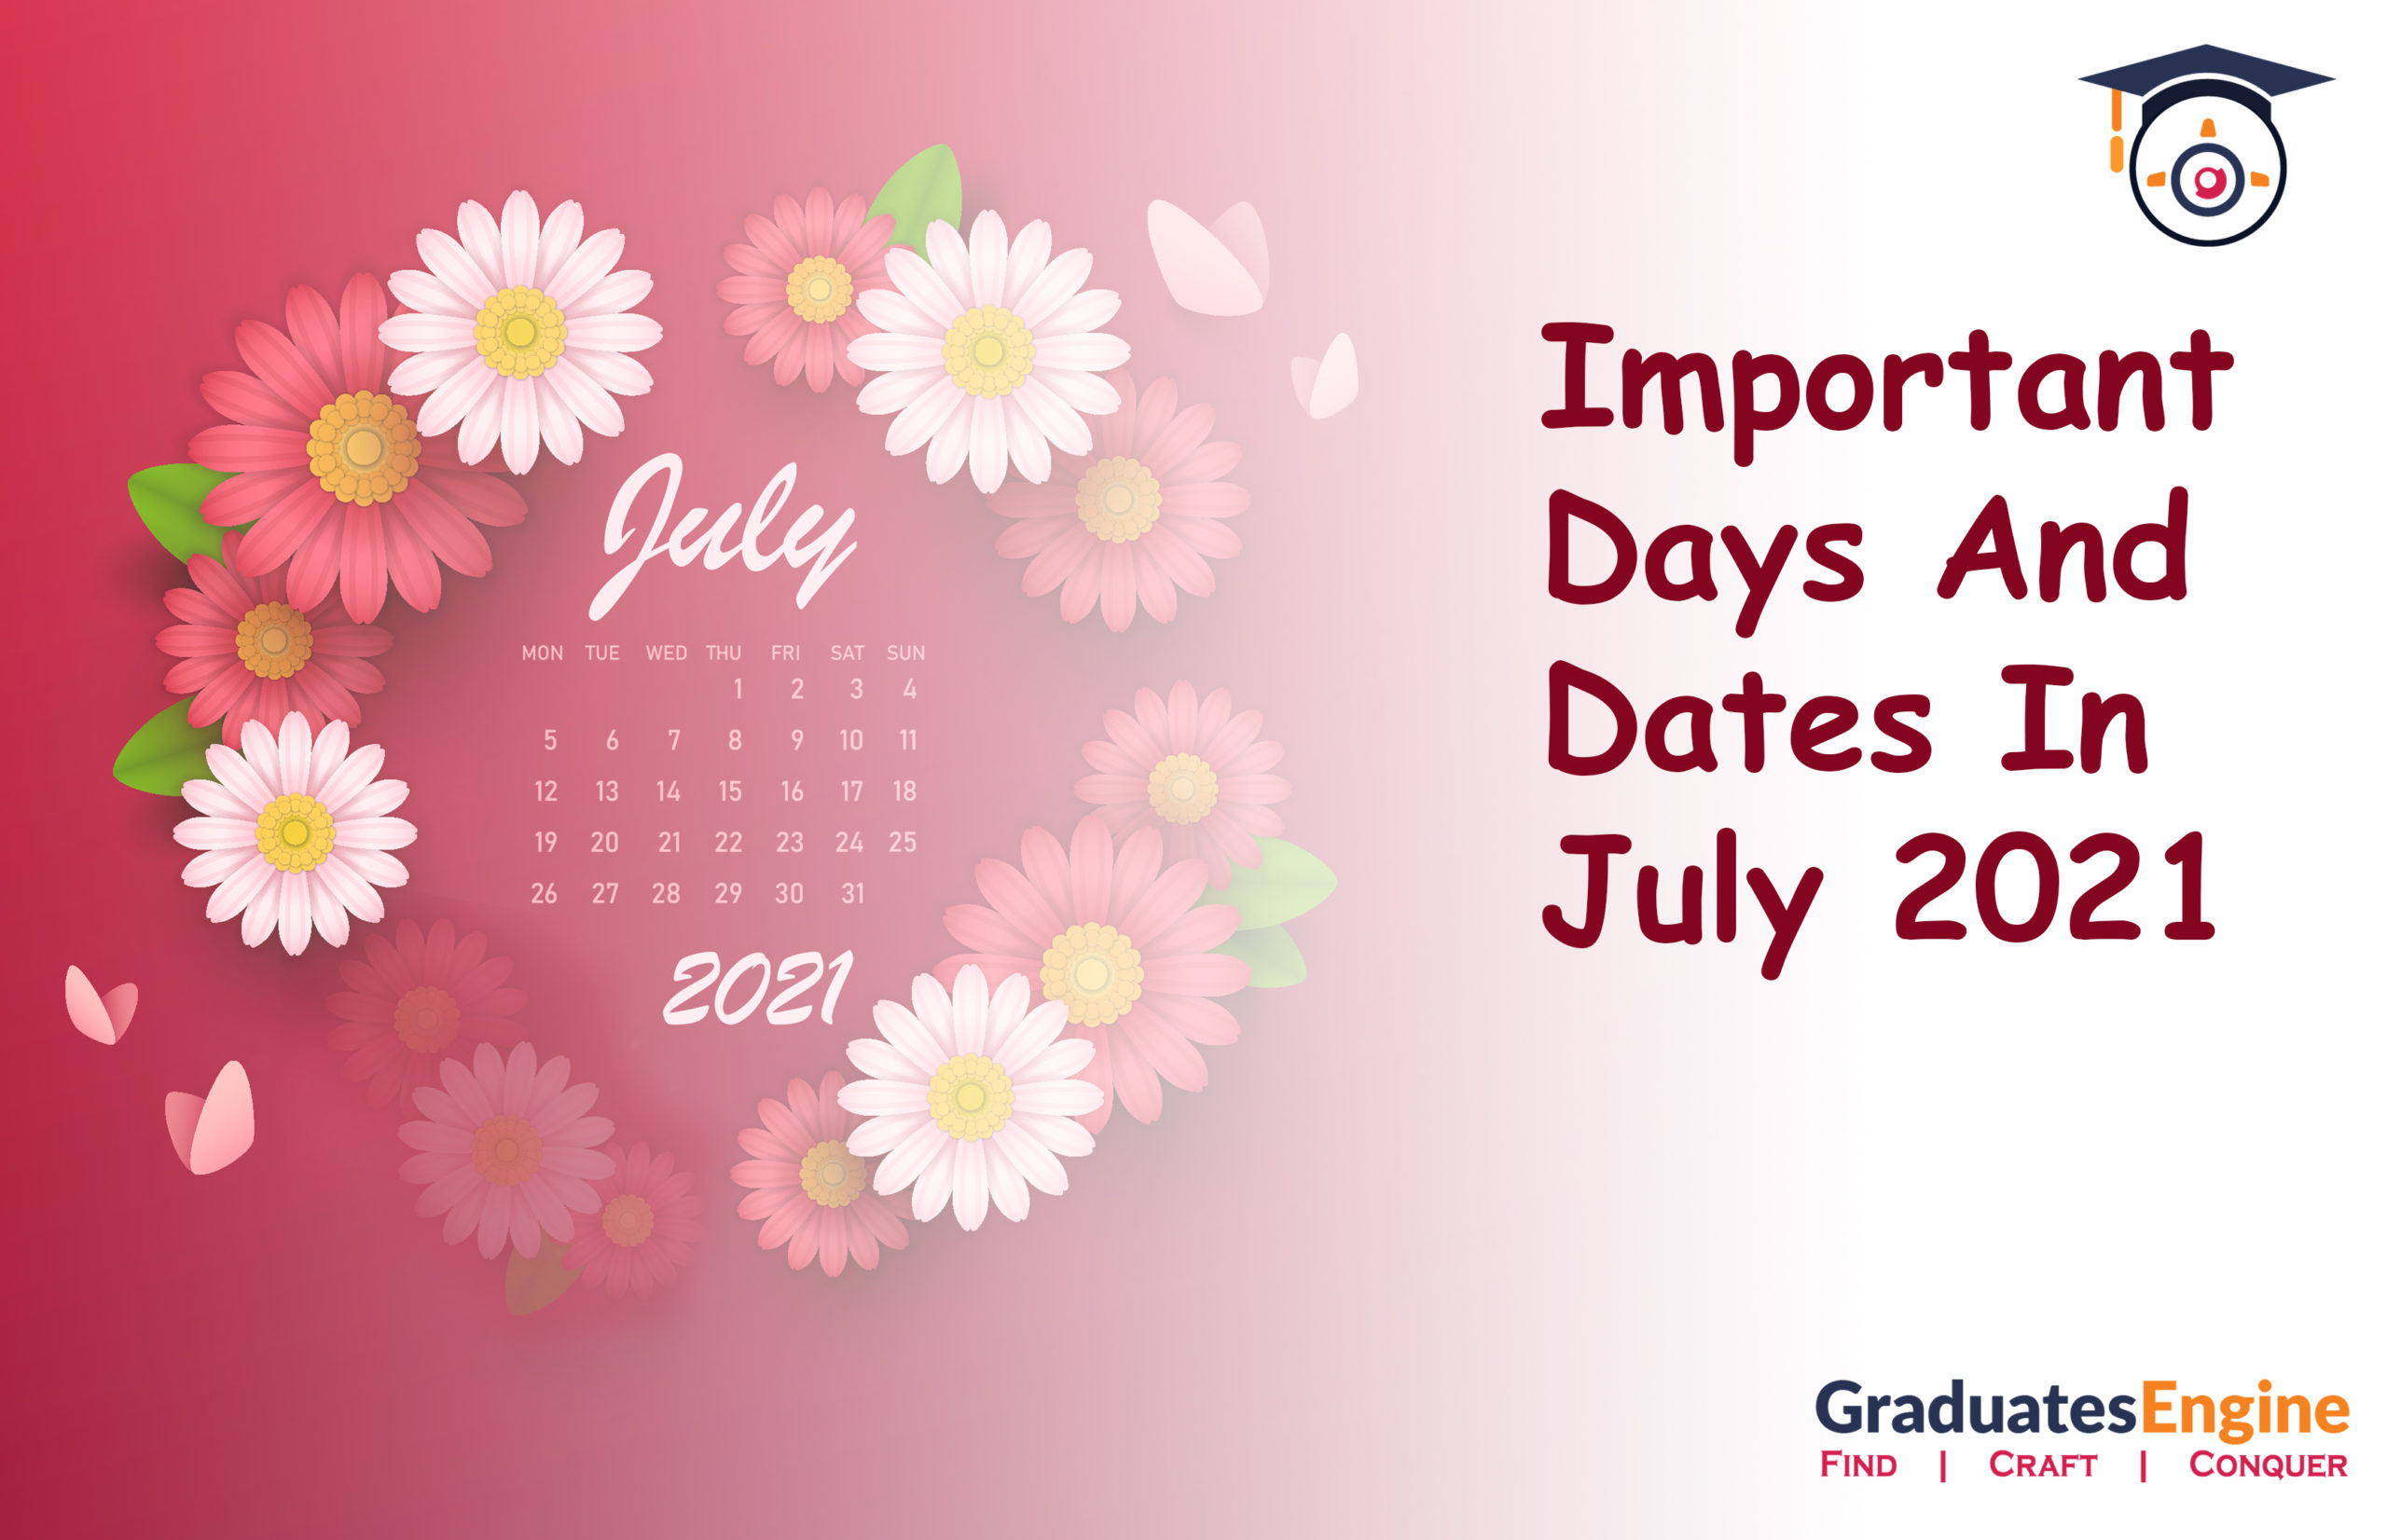 Important days and dates in July 2021